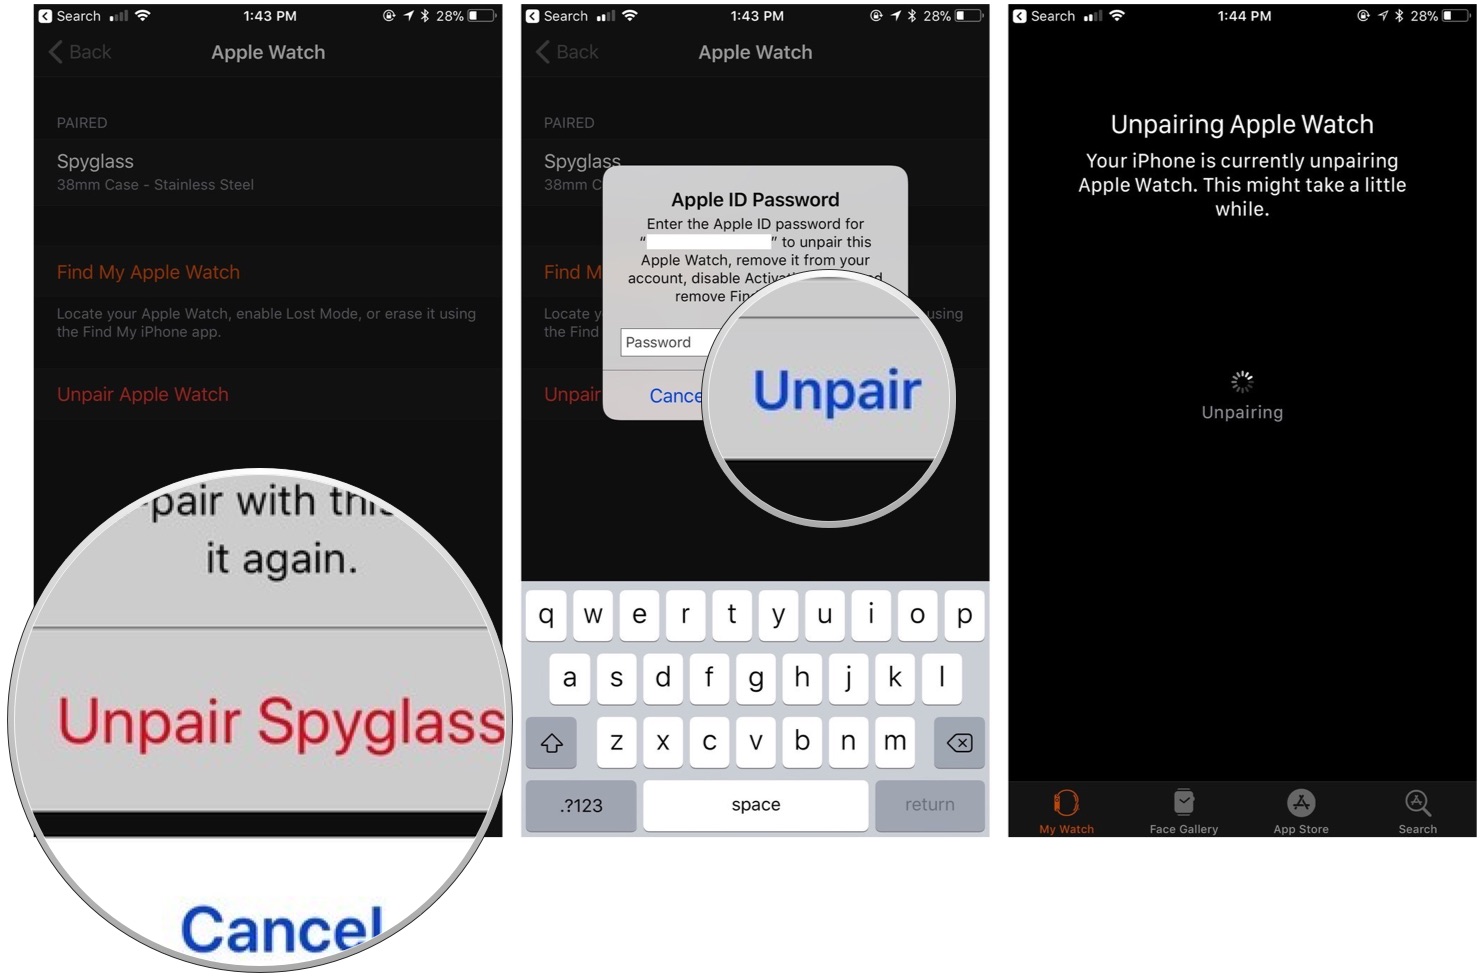 Unpair Apple Watch via iPhone: Disable the Activation Lock by entering your Apple ID password and pressing Unpair. From there, your watch will go through the steps of erasing itself.